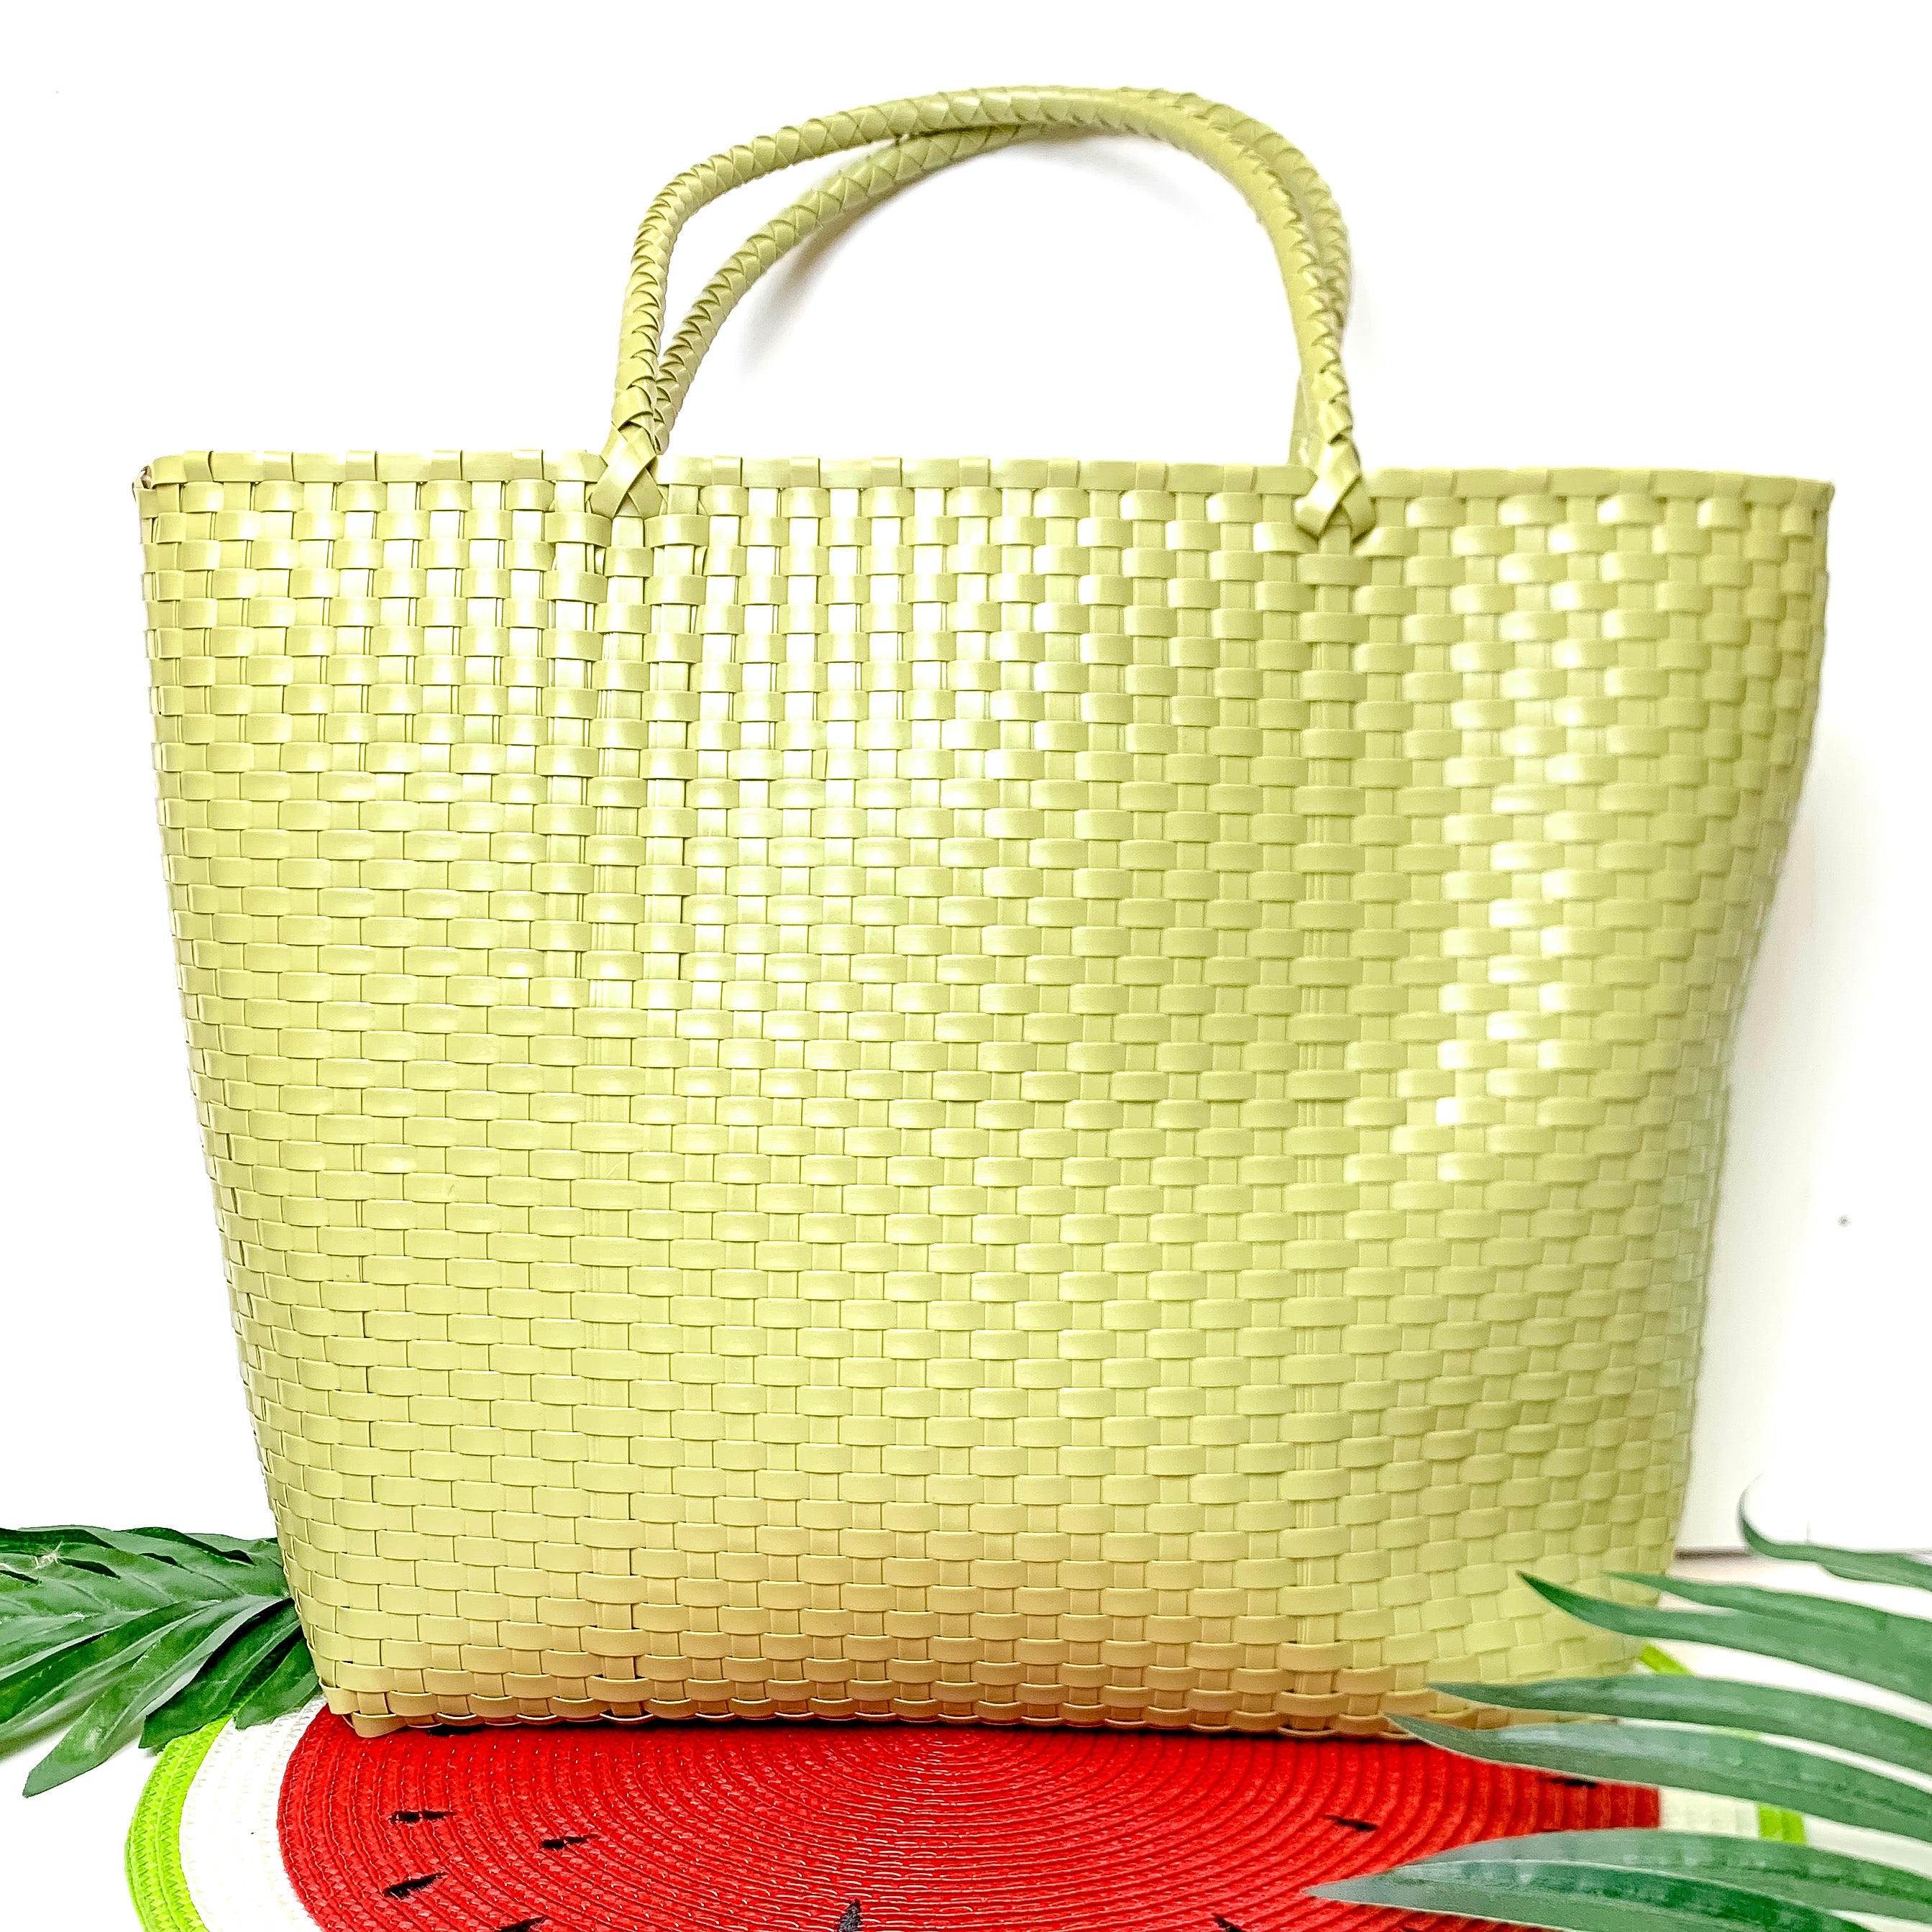 Coastal Couture Carryall Tote Bag in Sage Green